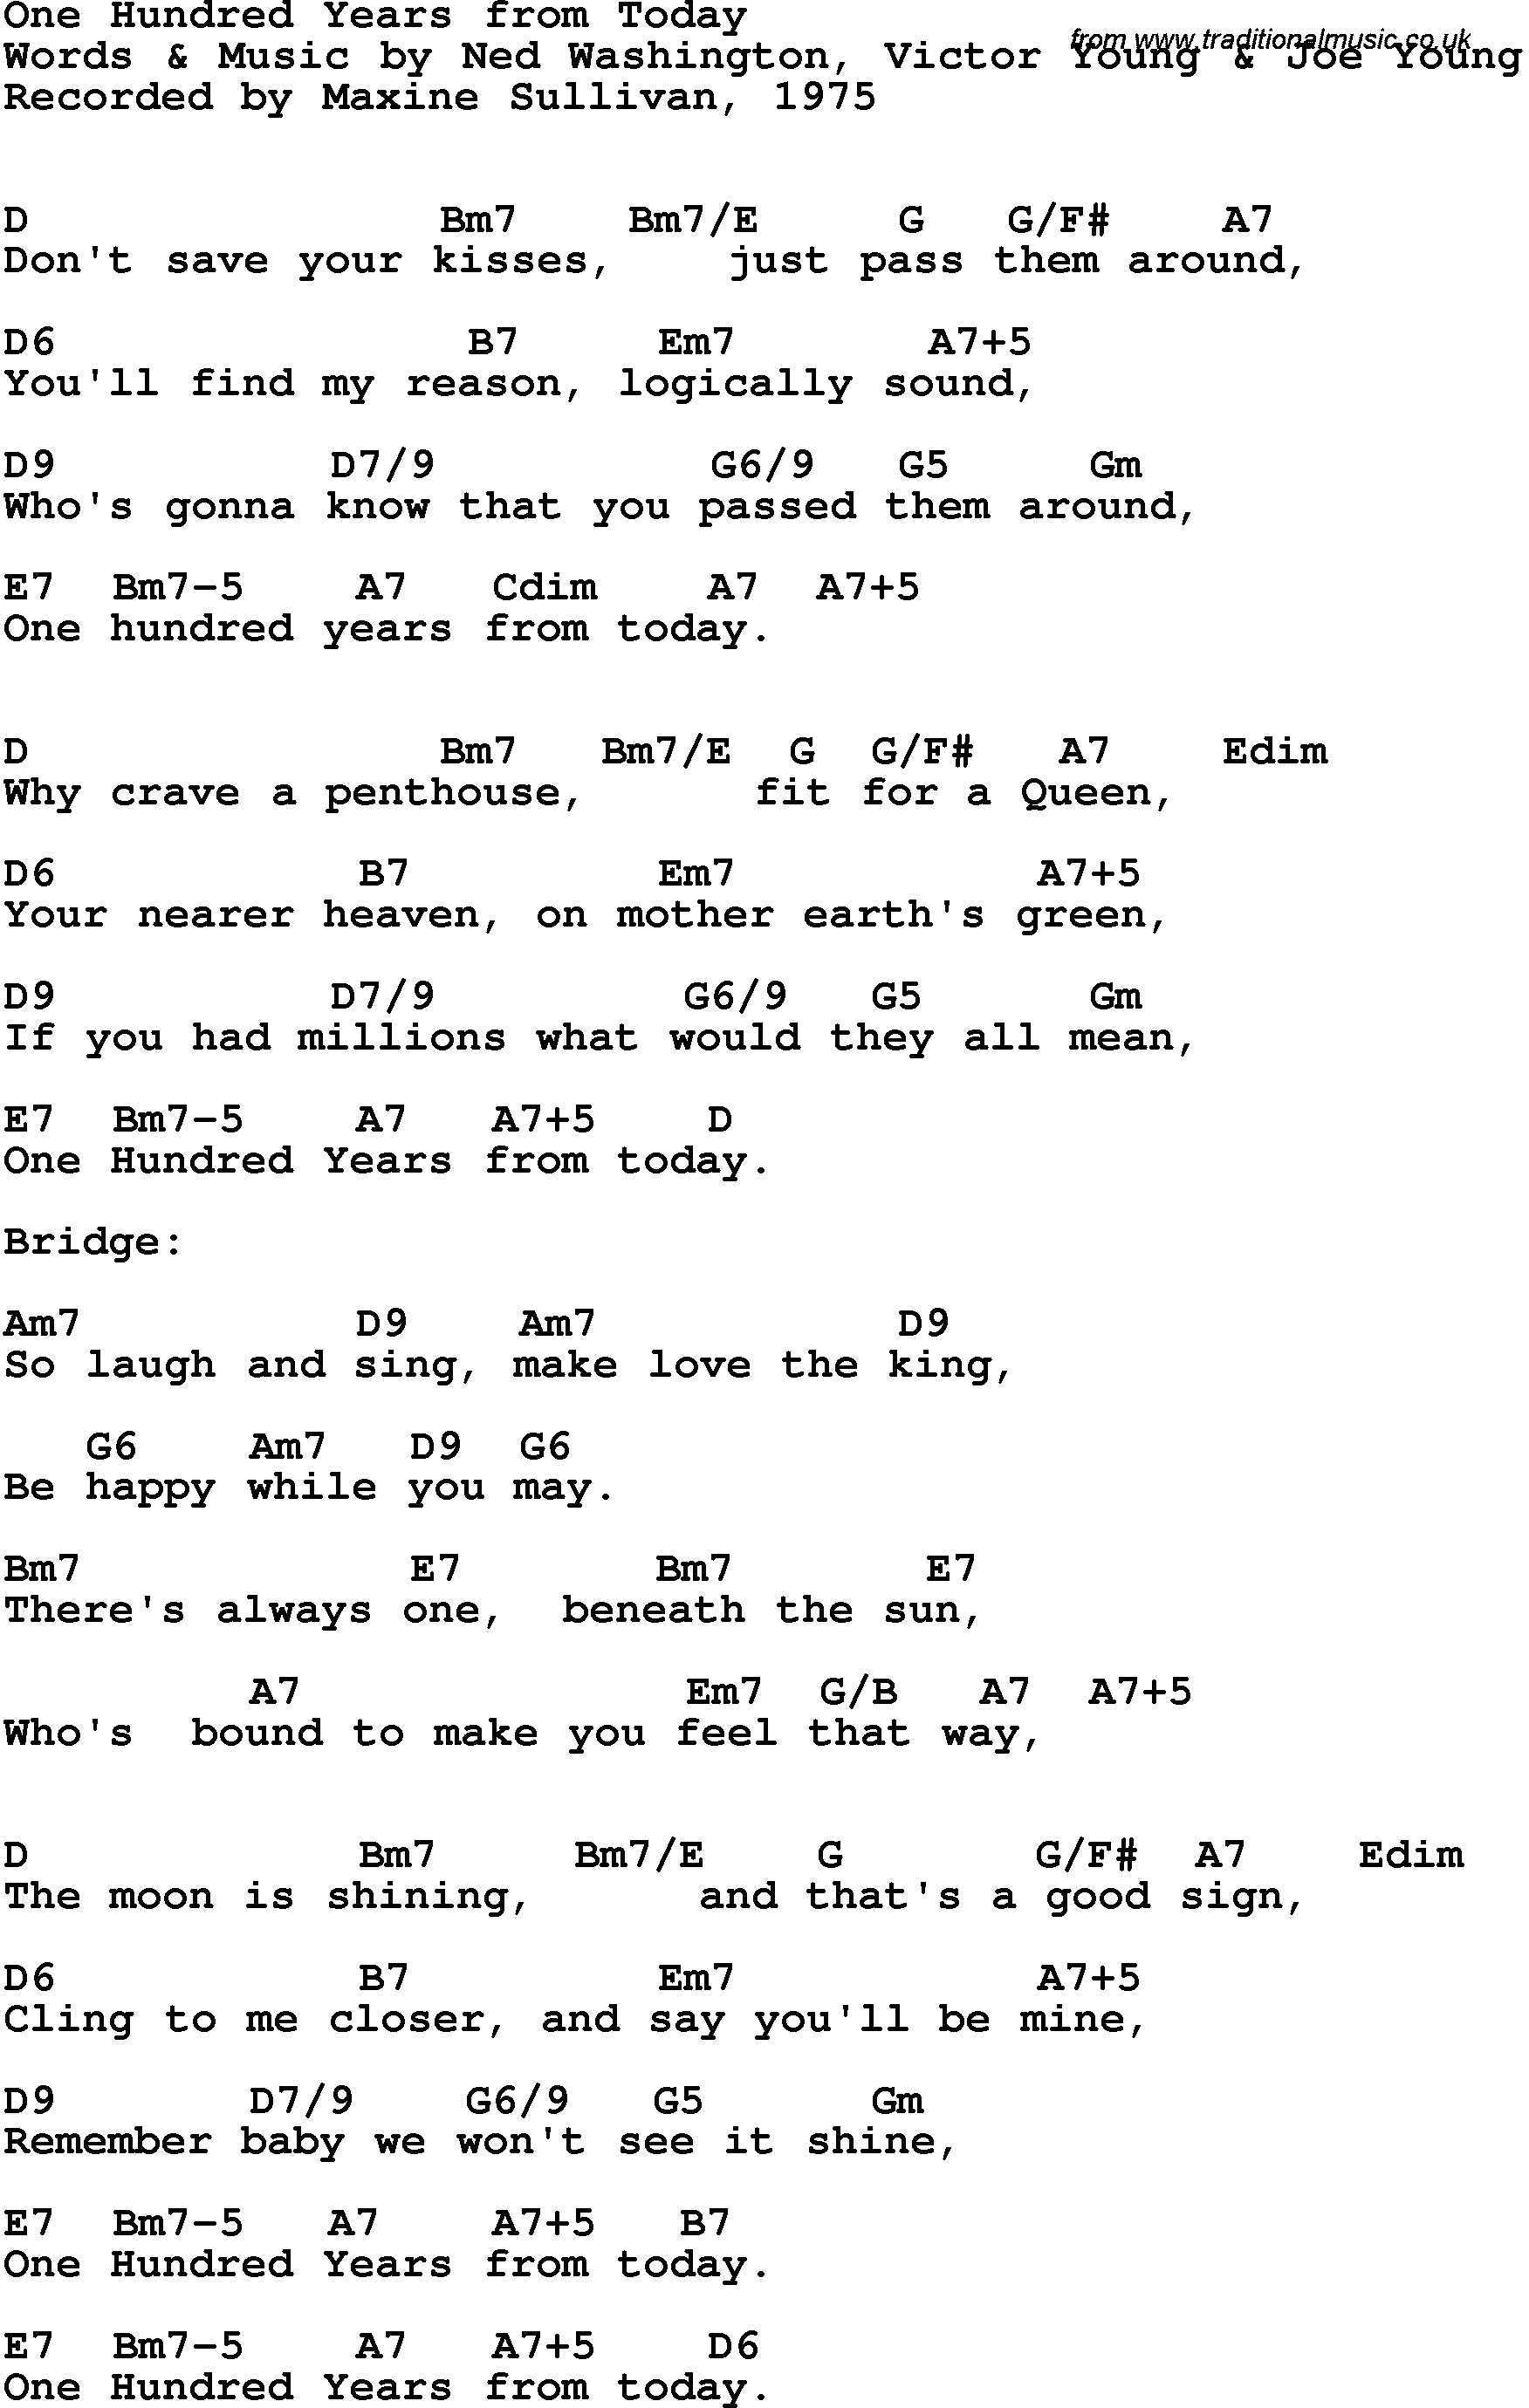 Song Lyrics with guitar chords for One Hundred Years From Today - Maxine Sullivan, 1975